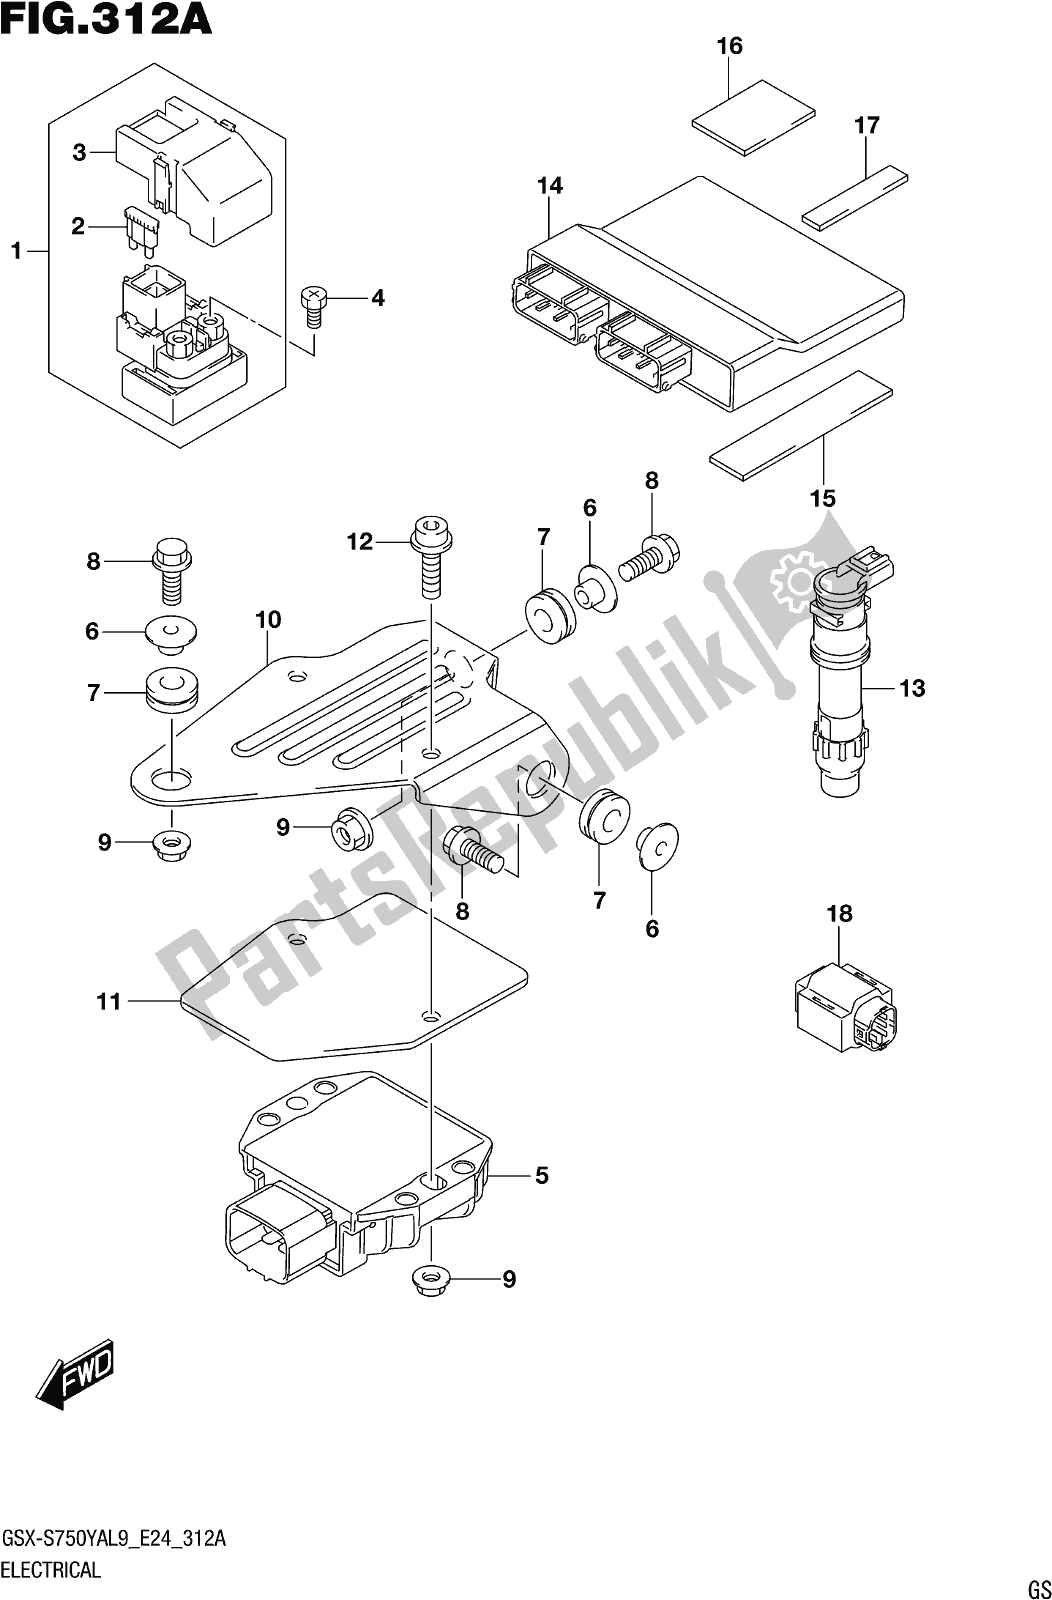 All parts for the Fig. 312a Electrical of the Suzuki Gsx-s 750 YA 2019